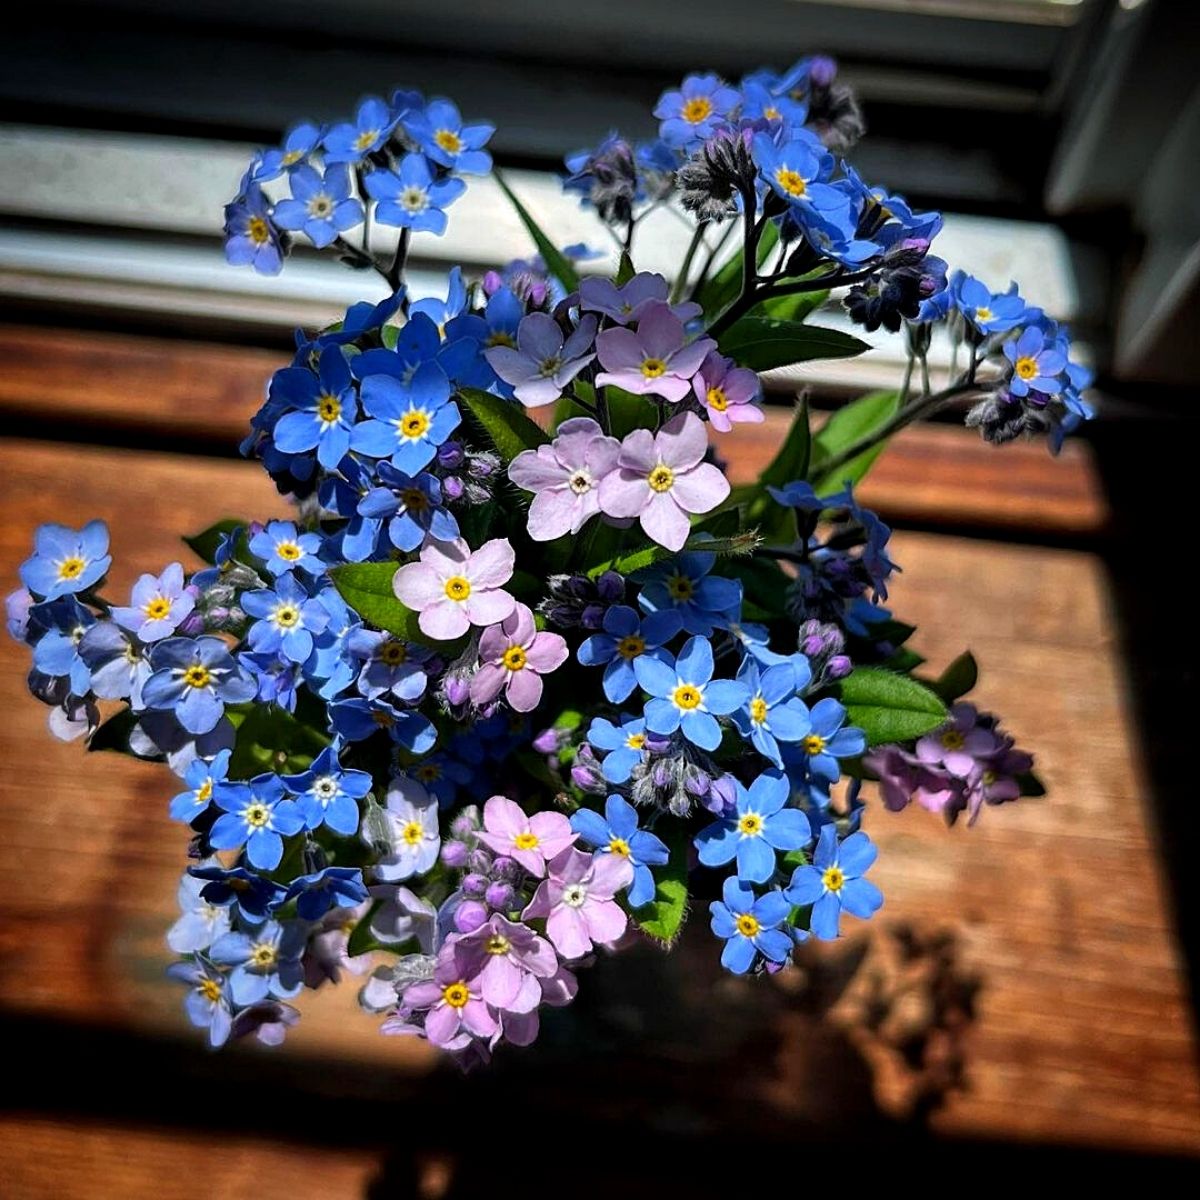 Forget Me Not Flowers Are An Appeal for Love and Longing to Be Remembered